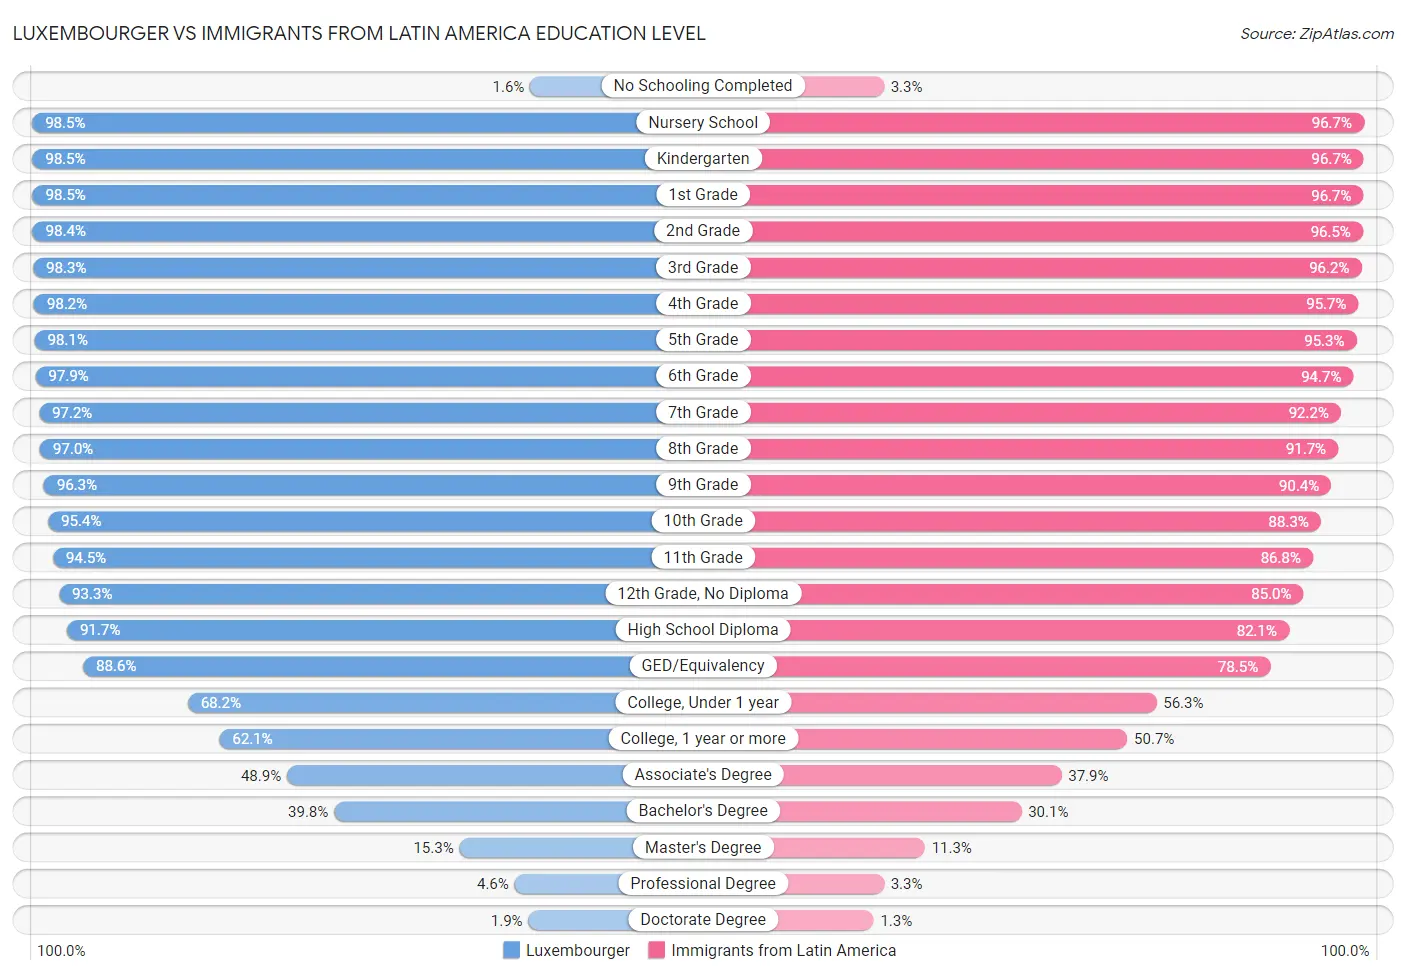 Luxembourger vs Immigrants from Latin America Education Level